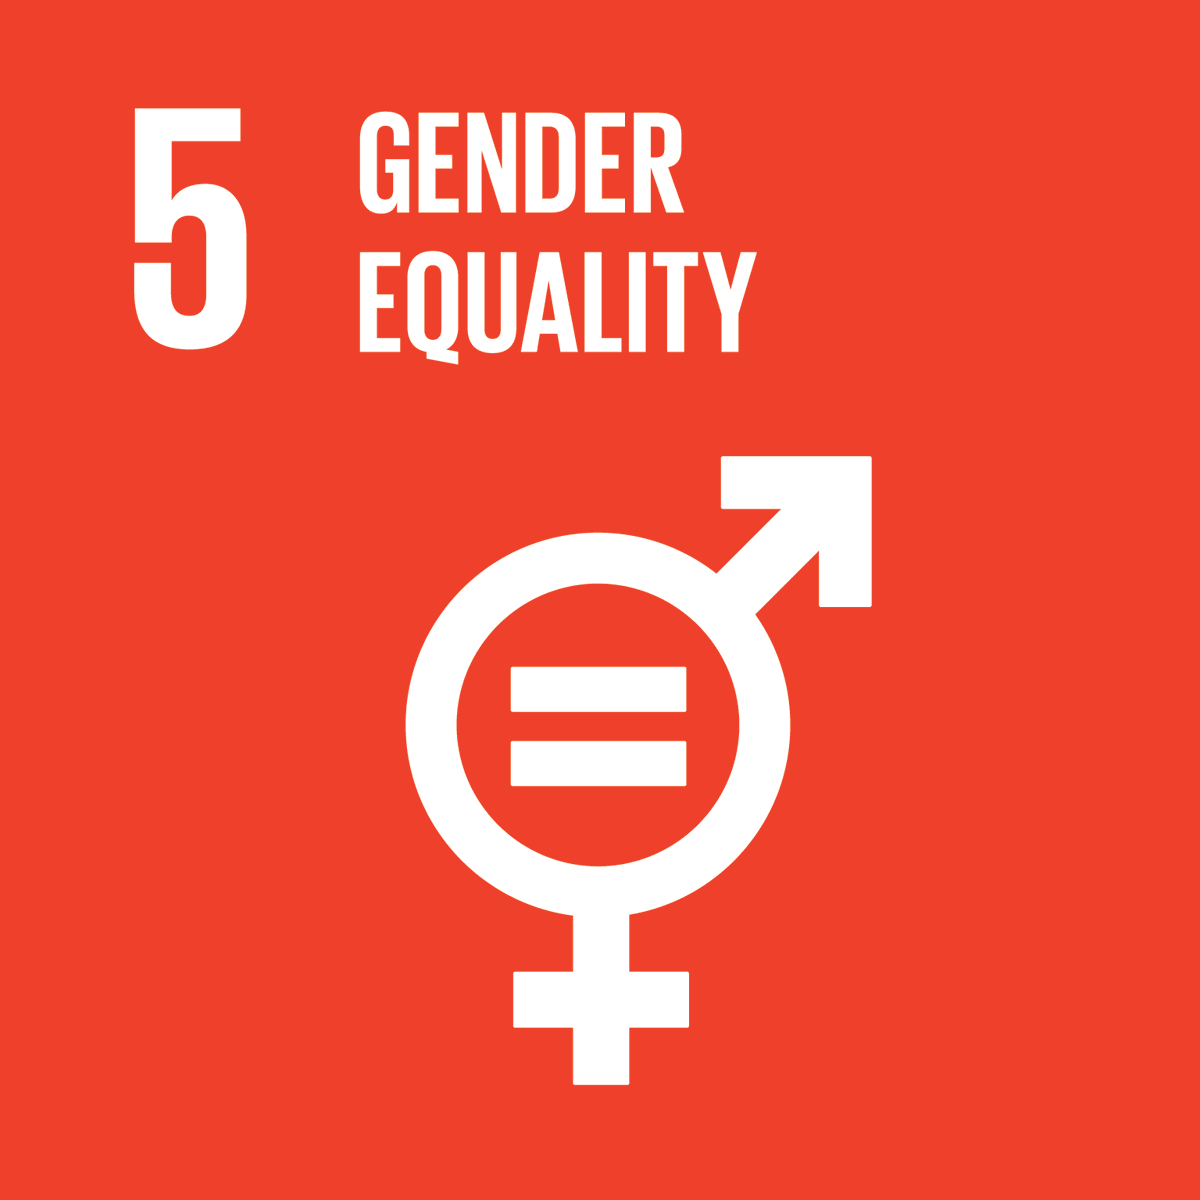 Goal 5: Gender equalityMost important & her favorite goals is gender equality. She says in all her interviews about difference in gender in all the stages.